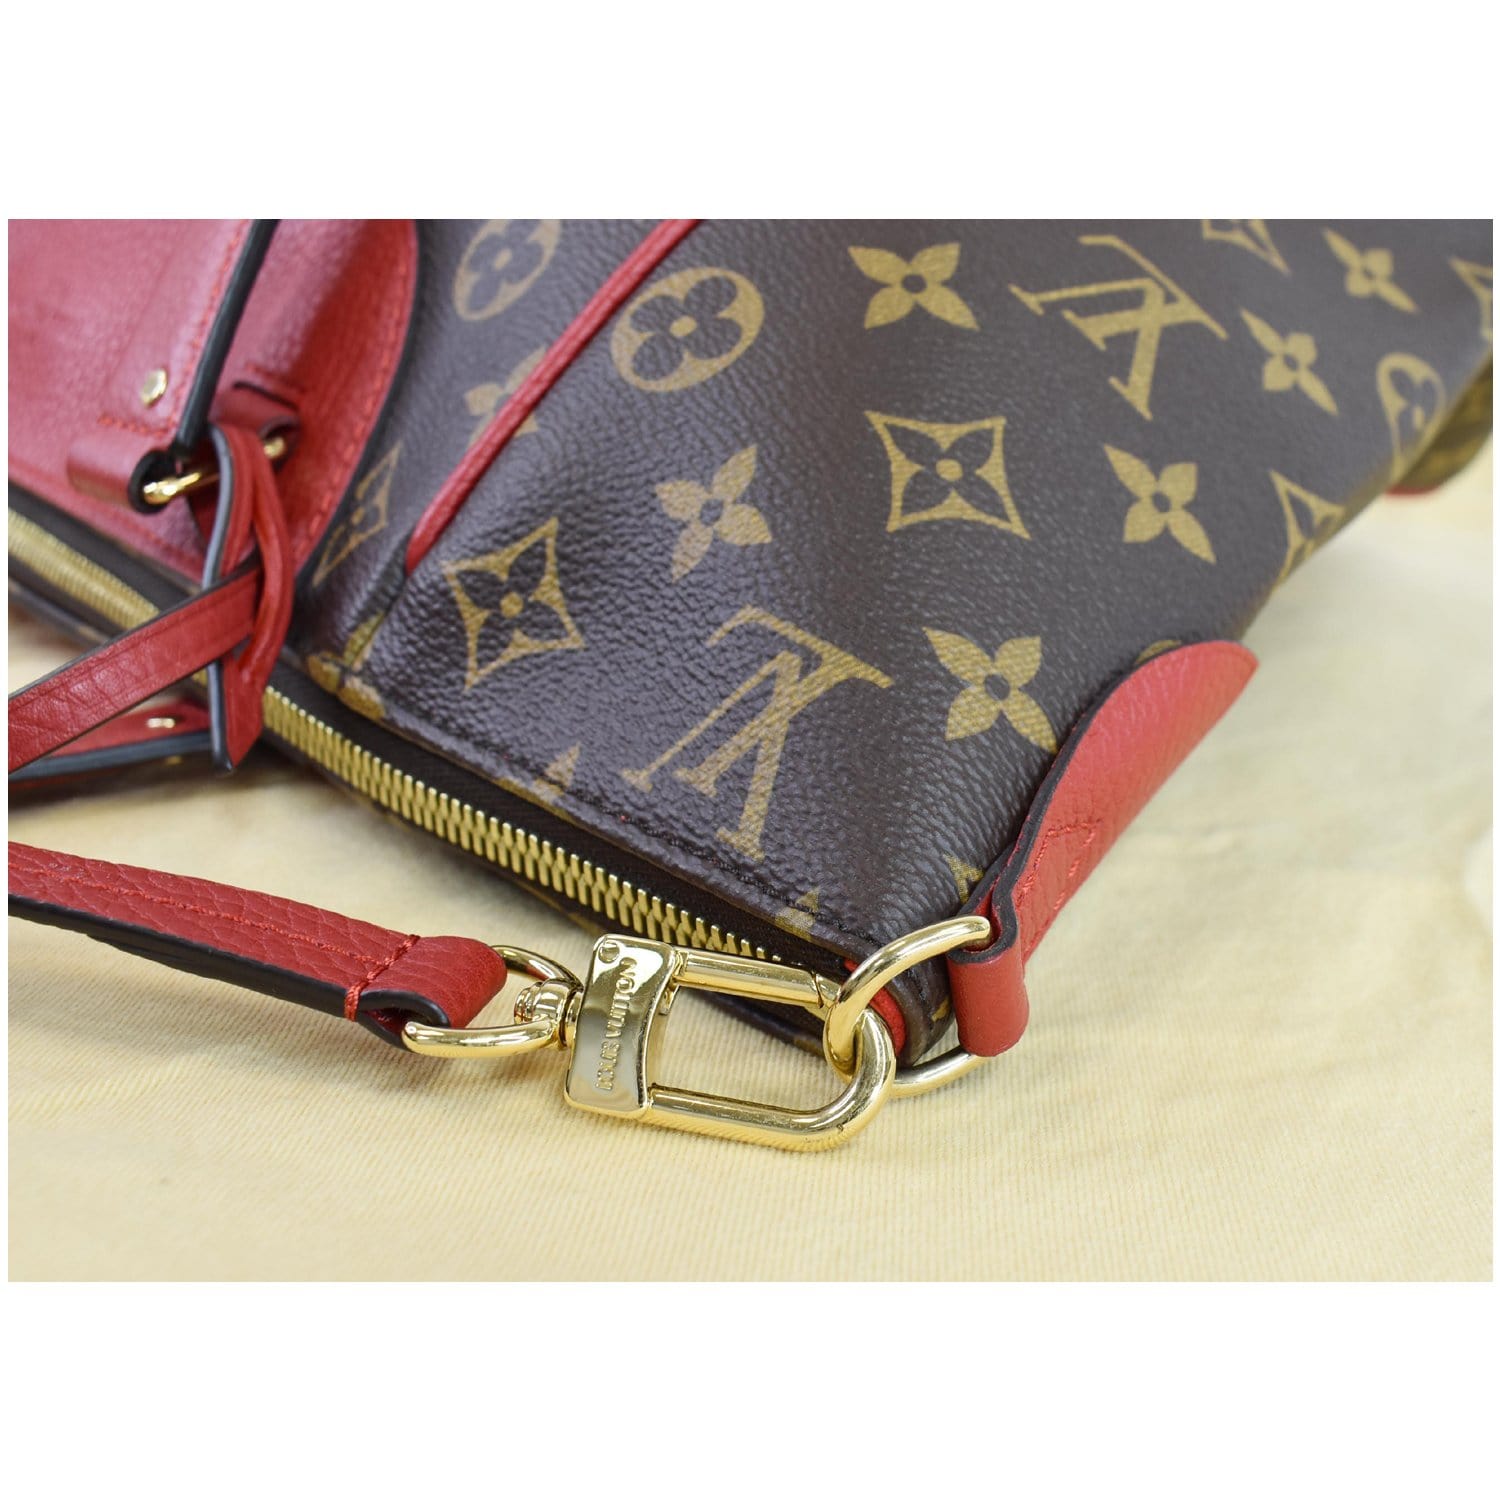 lv bag with red trim